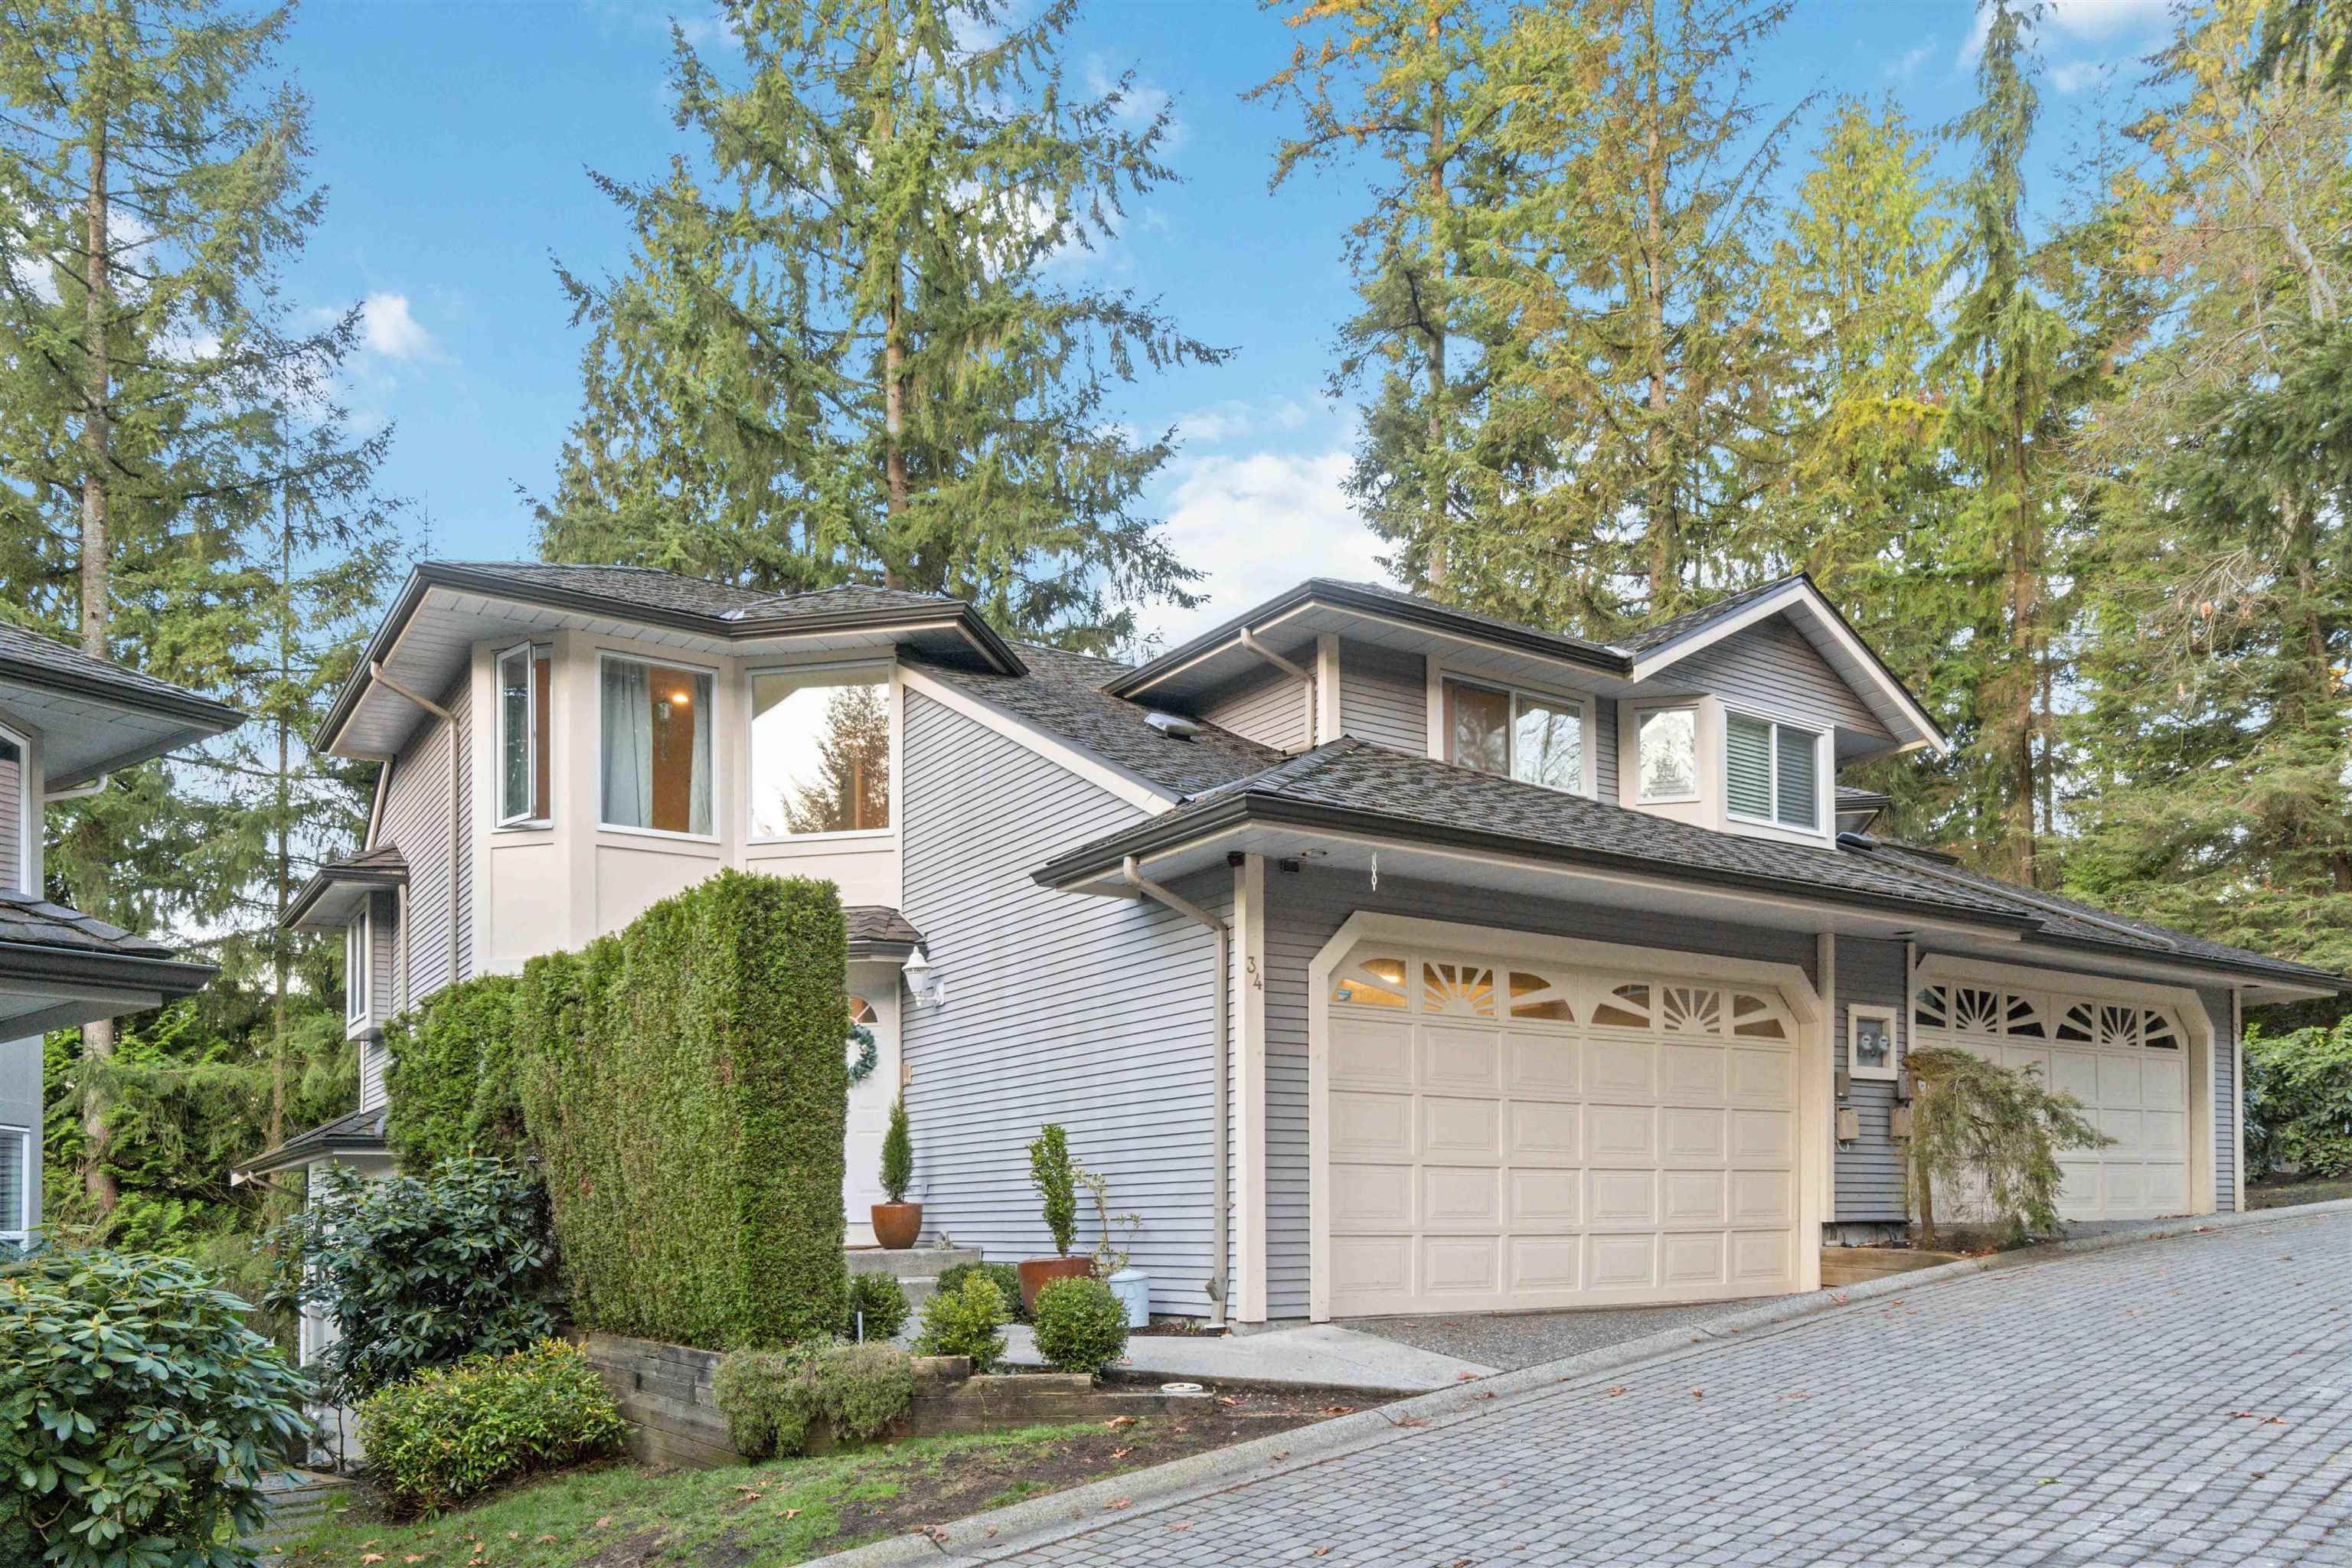 New property listed in Heritage Mountain, Port Moody